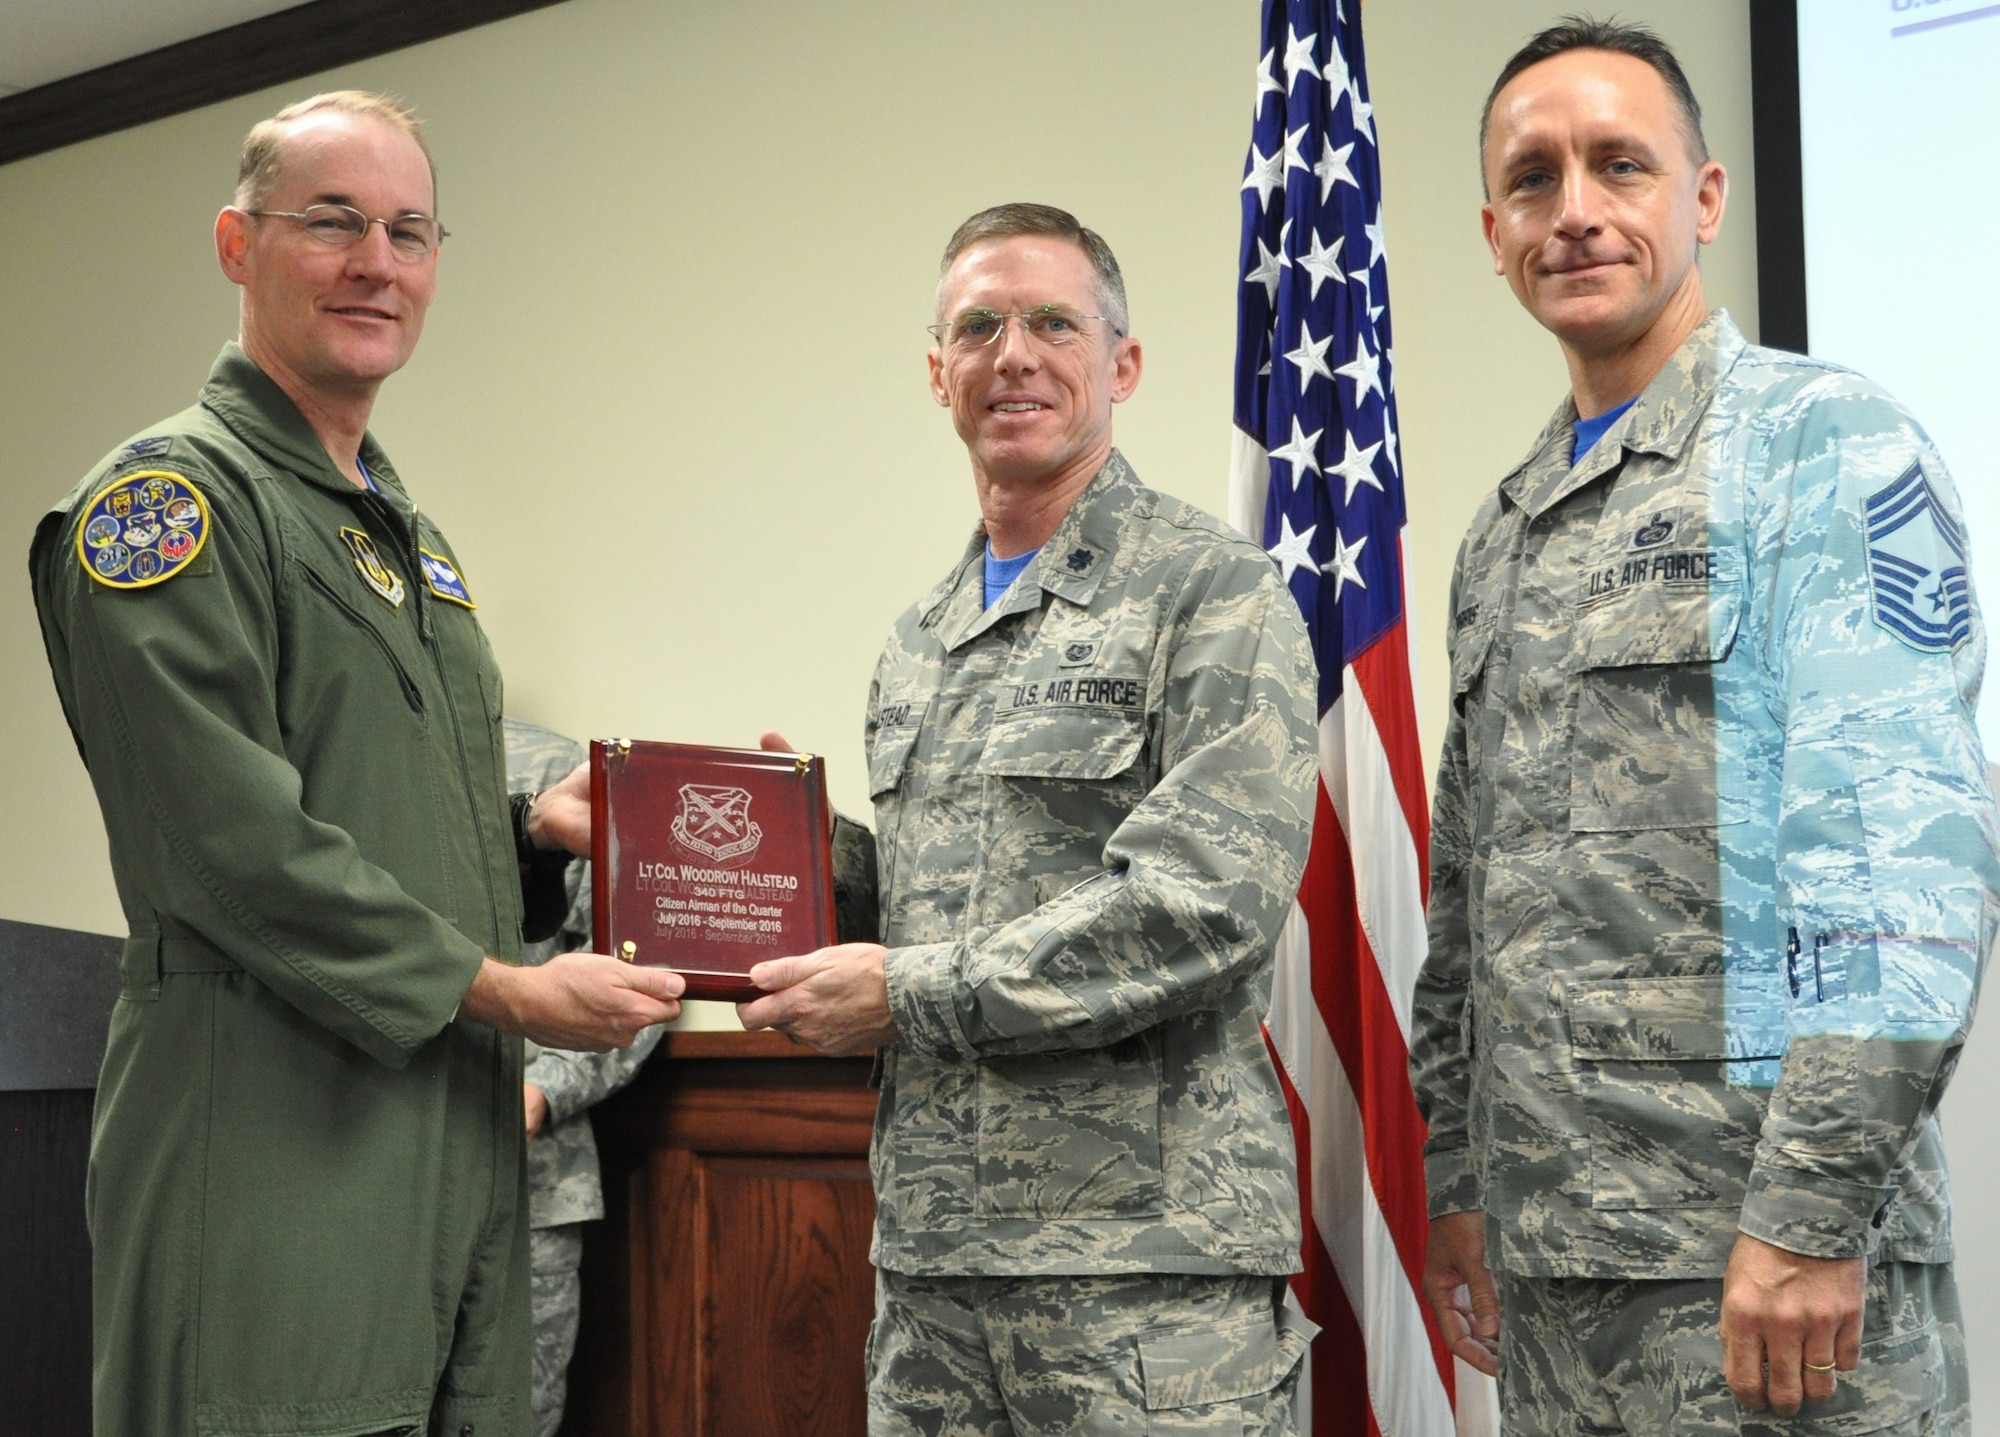 Col Roger Suro, 340th FTG commander (L),  and Chief Master Sgt. Jimmie Morris present Lt. Col. Woodrow Halstead (center) with the award for citizen airman of the quarter, third quarter during the Group's MUTA held Dec. 1-2 at Joint Base San Antonio-Randolph, Texas (Photo by Janis El Shabazz).